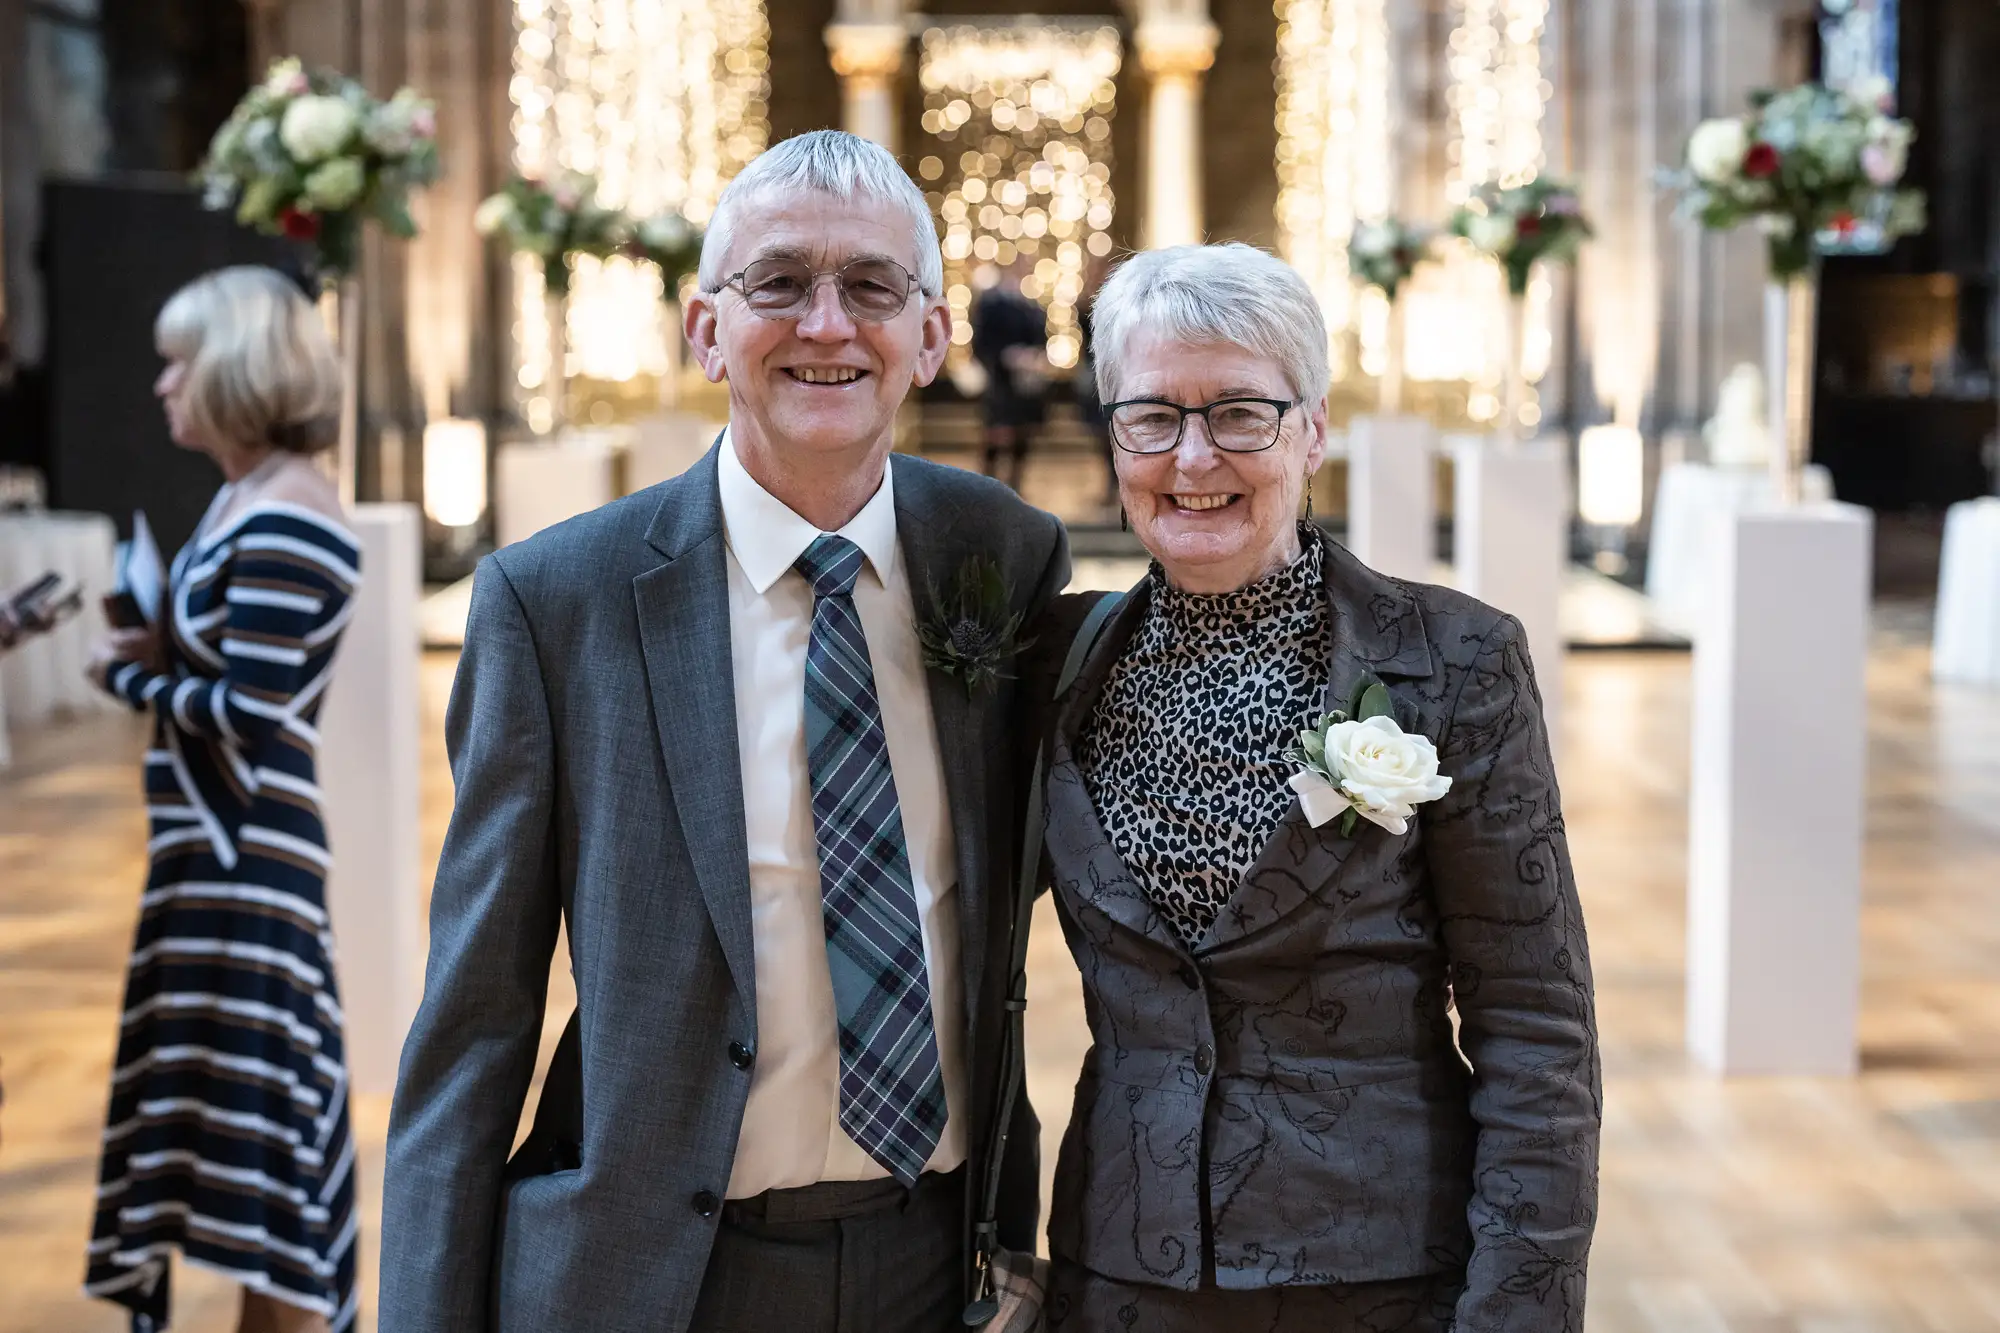 An elderly couple smiling at a wedding, the man in a gray suit with a boutonniere and the woman in a patterned dress with a corsage, inside a grand hall with floral decorations.